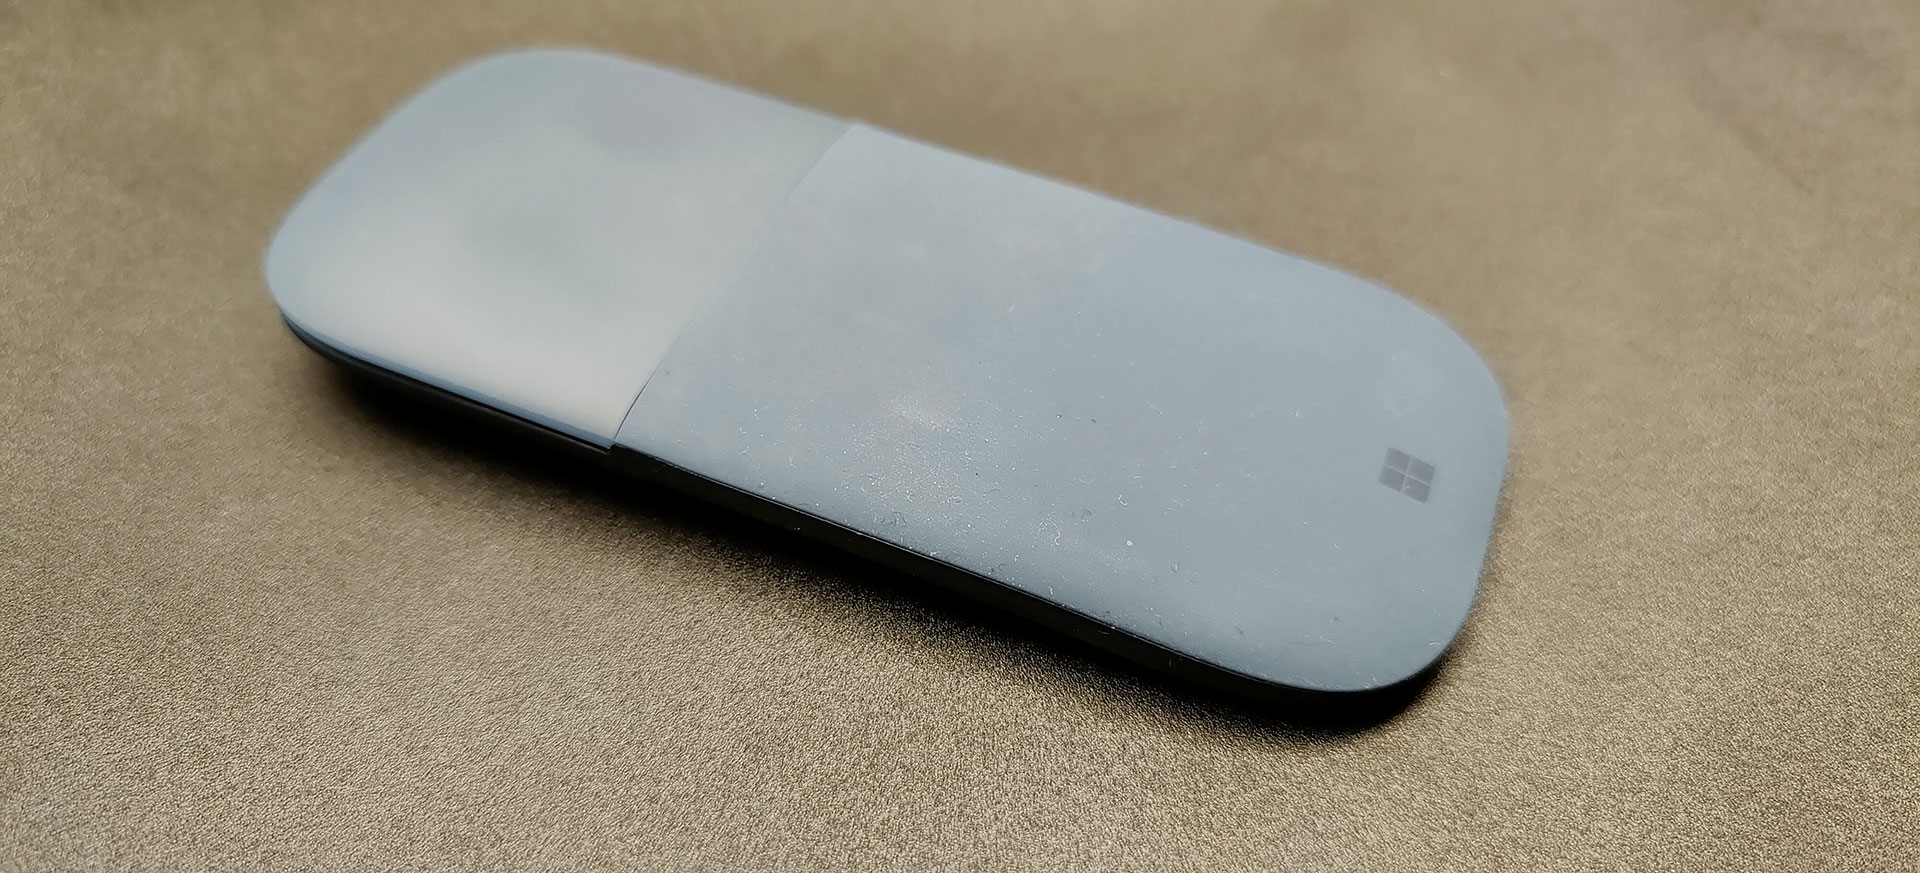 Microsoft Surface Arc Mouse uit